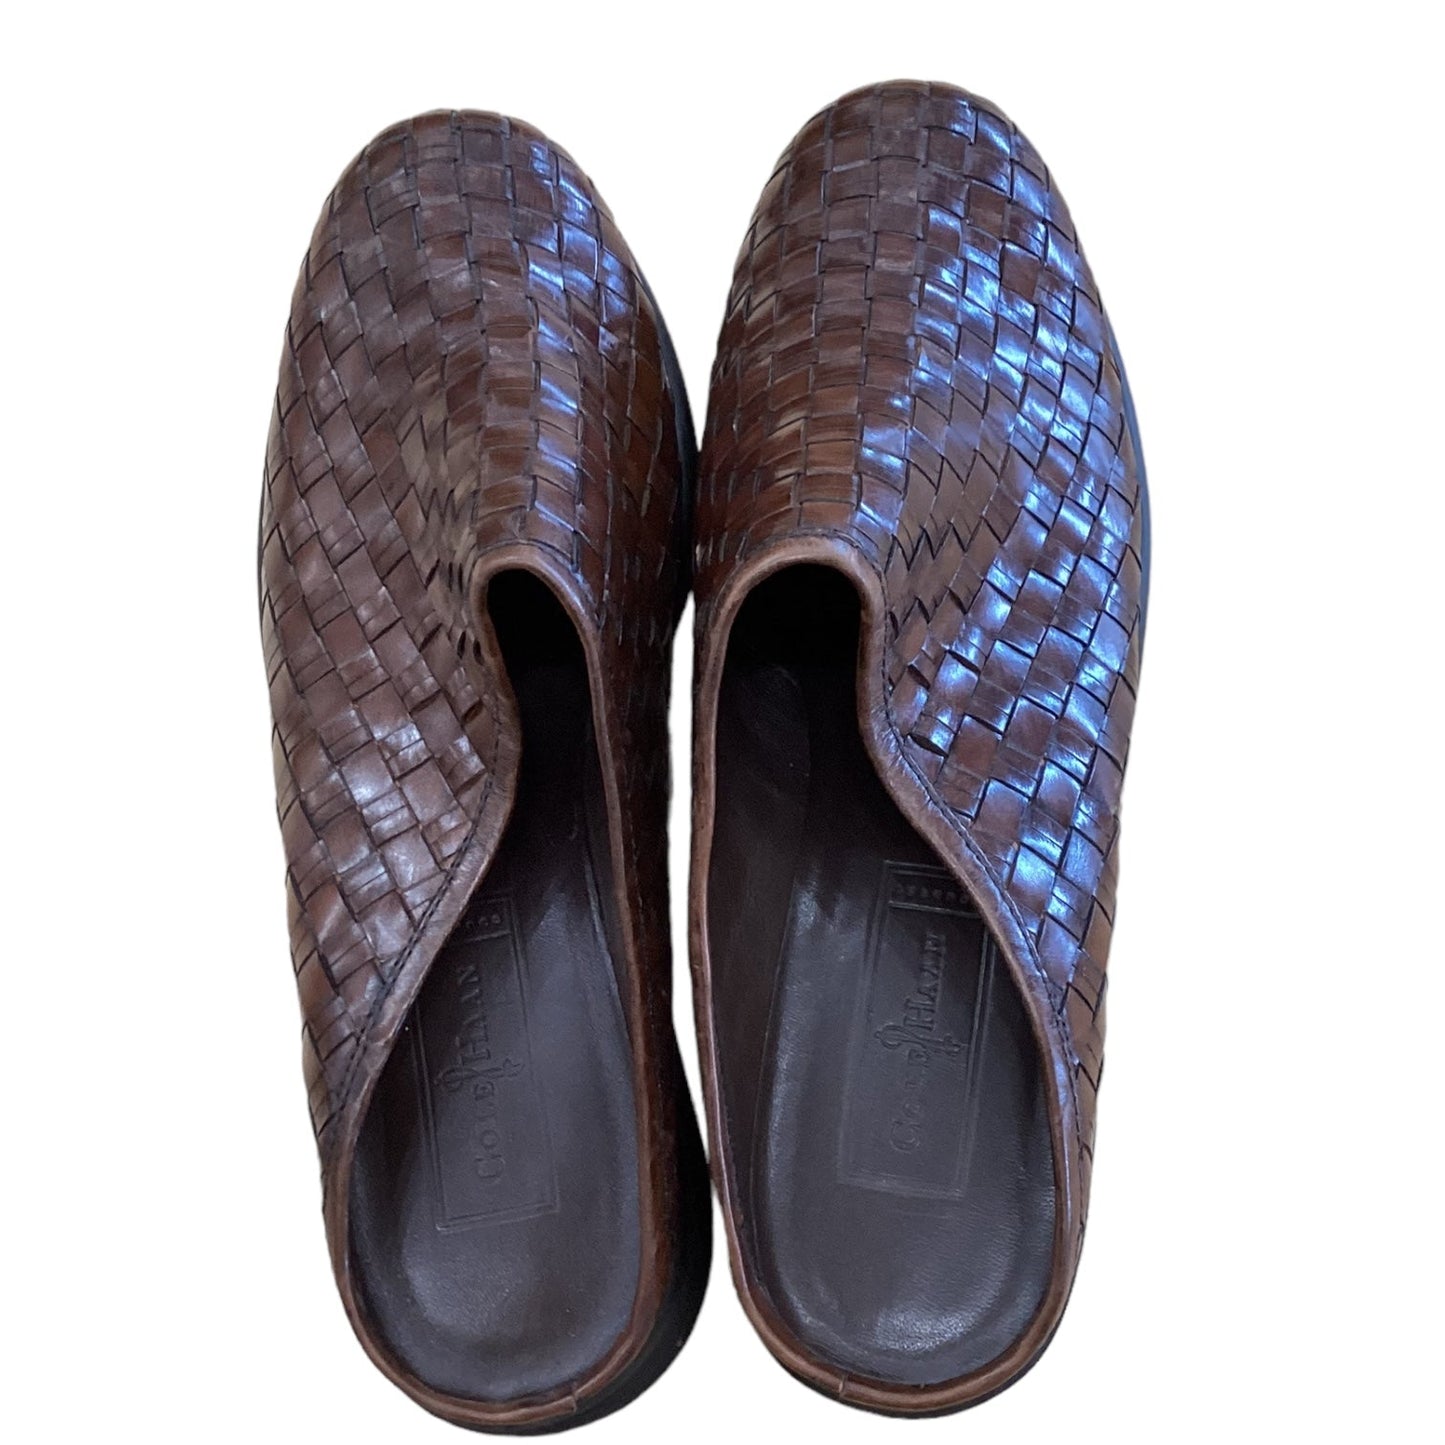 Brown Shoes Flats Cole-haan, Size 9